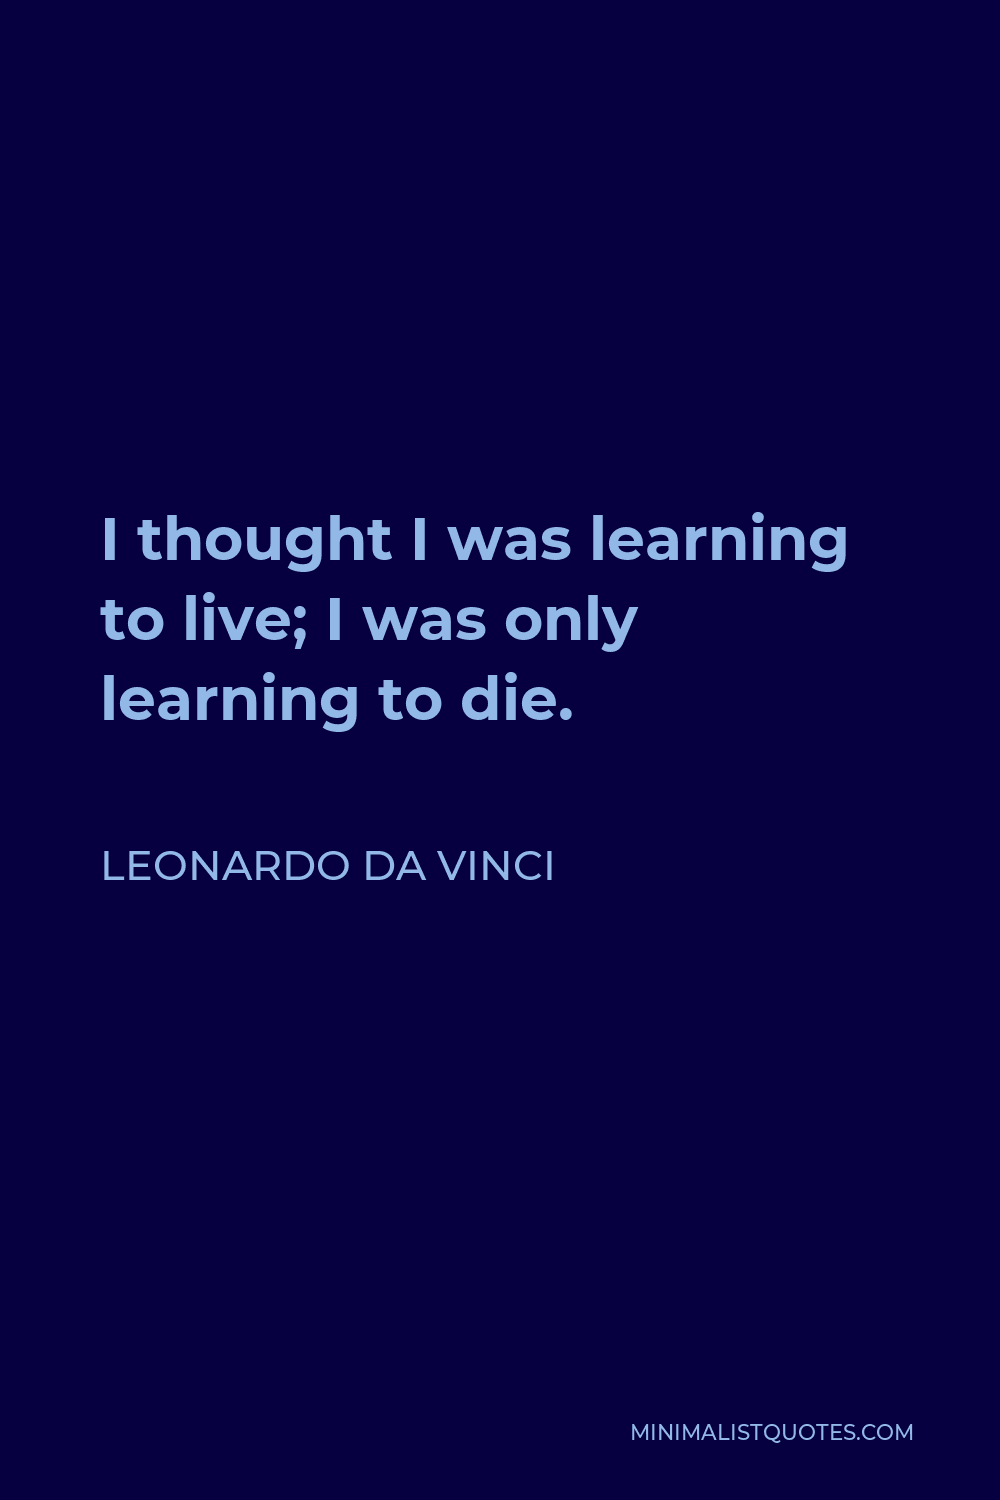 Leonardo da Vinci Quote - I thought I was learning to live; I was only learning to die.